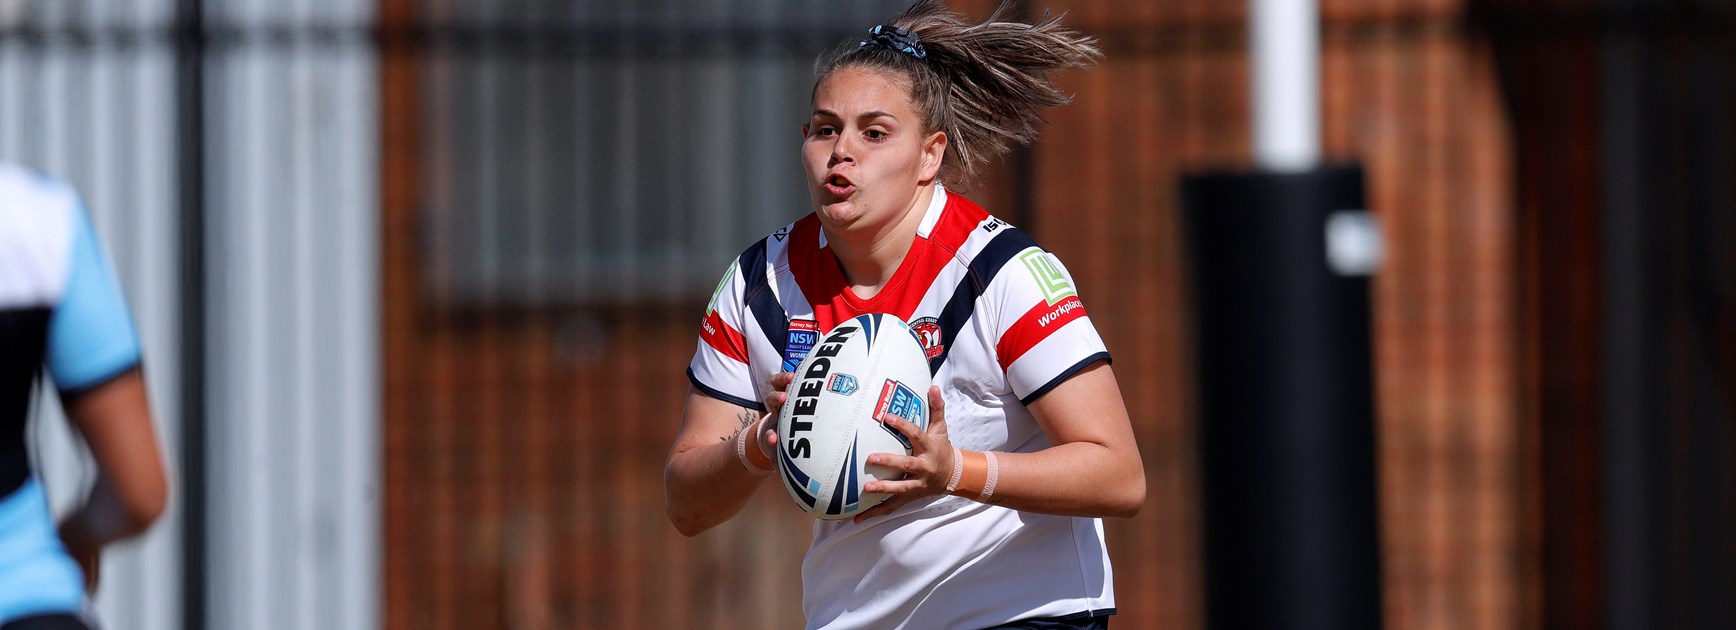 NSW Women’s Rd 6 | Roosters rally without Kelly